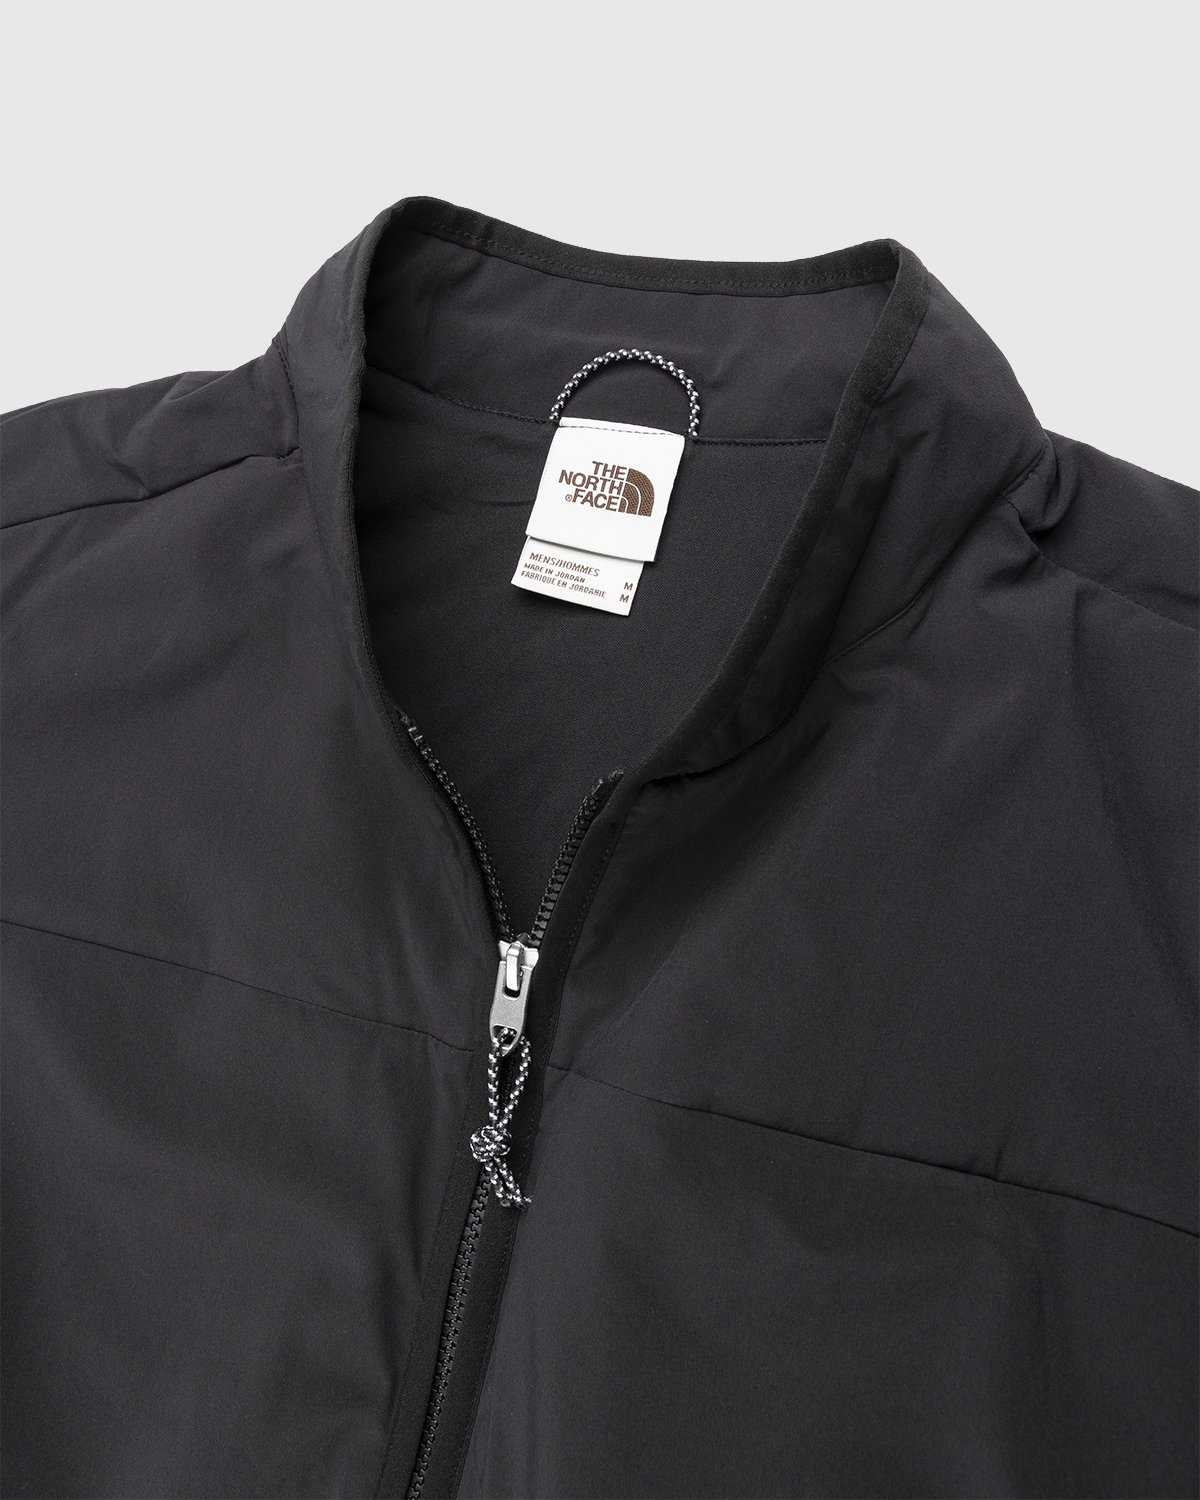 The North Face - Mountain Sweatshirt Pullover Black - Clothing - Black - Image 5